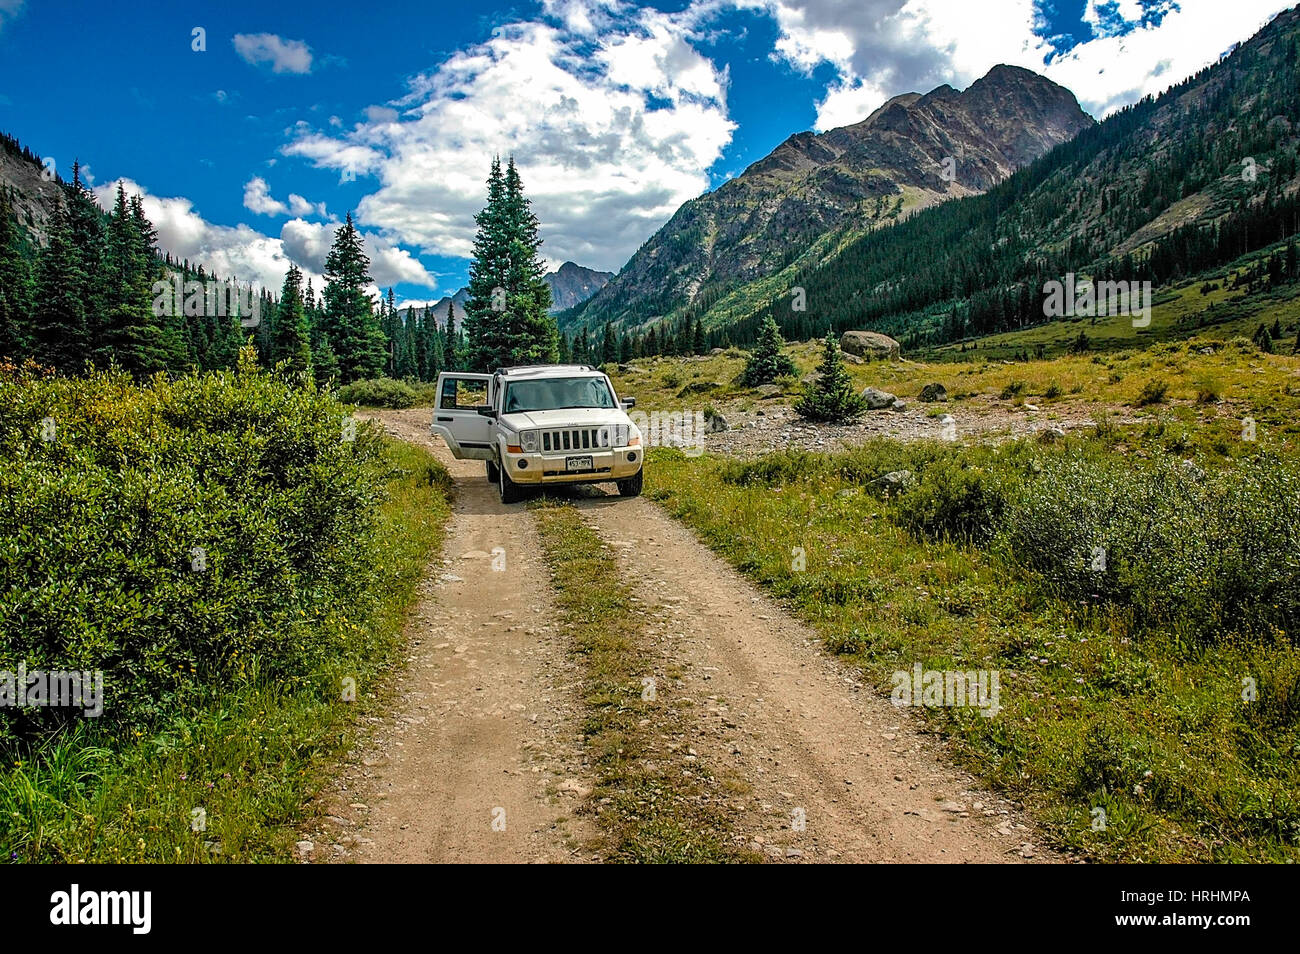 A jeep 'Patriot' on Grizzly Lake offload Trail near Independence Pass in Aspen, Colorado. Stock Photo